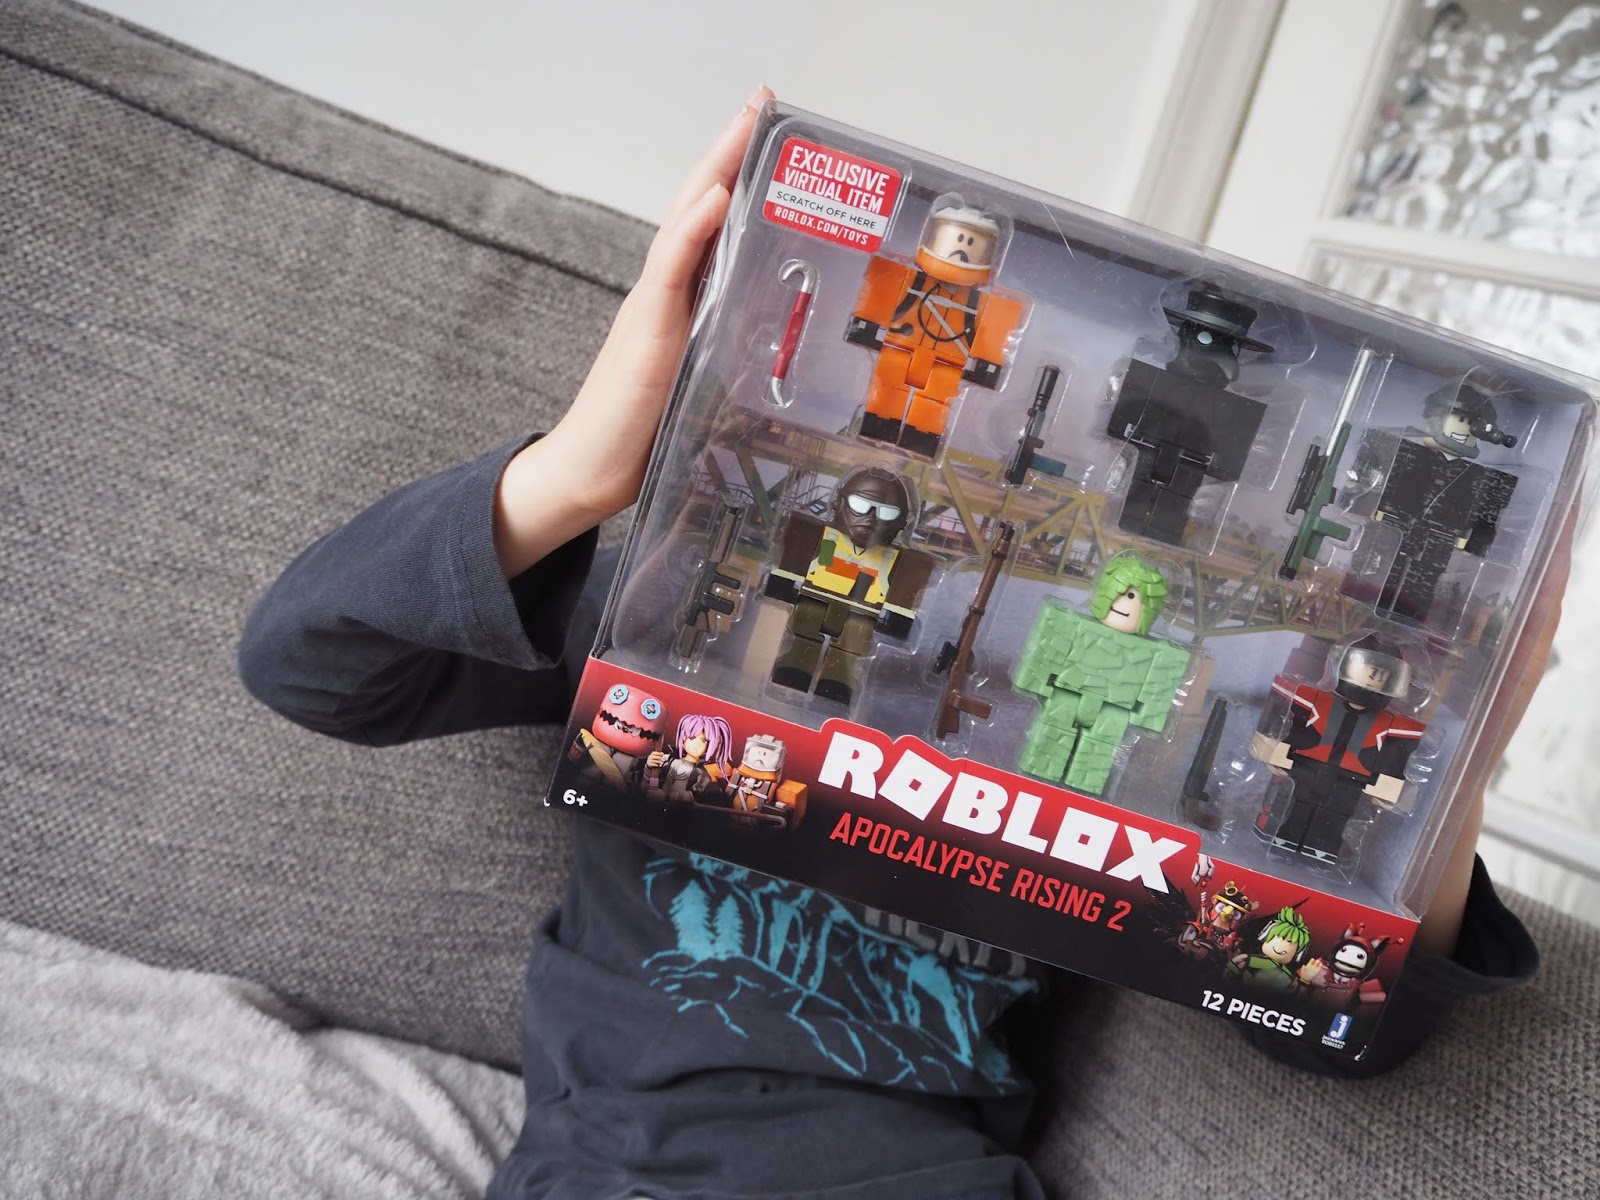 Chic Geek Diary The New Roblox Toys From Jazwares Review Giveaway - roblox apocalypse rising 2 weapons